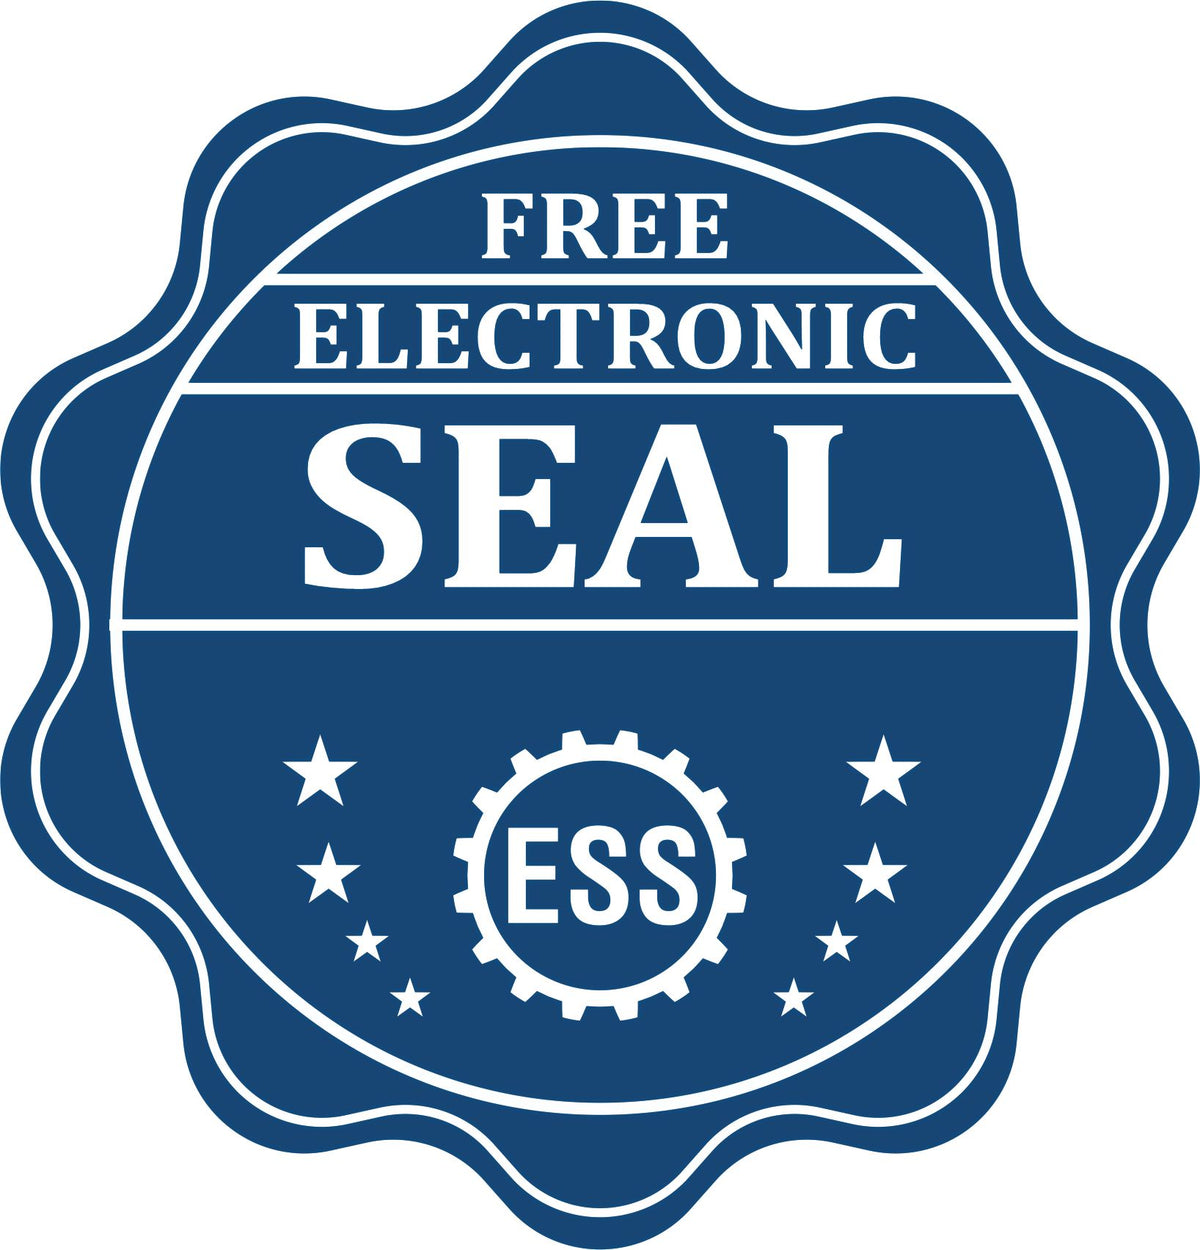 A badge showing a free electronic seal for the State of Idaho Long Reach Architectural Embossing Seal with stars and the ESS gear on the emblem.